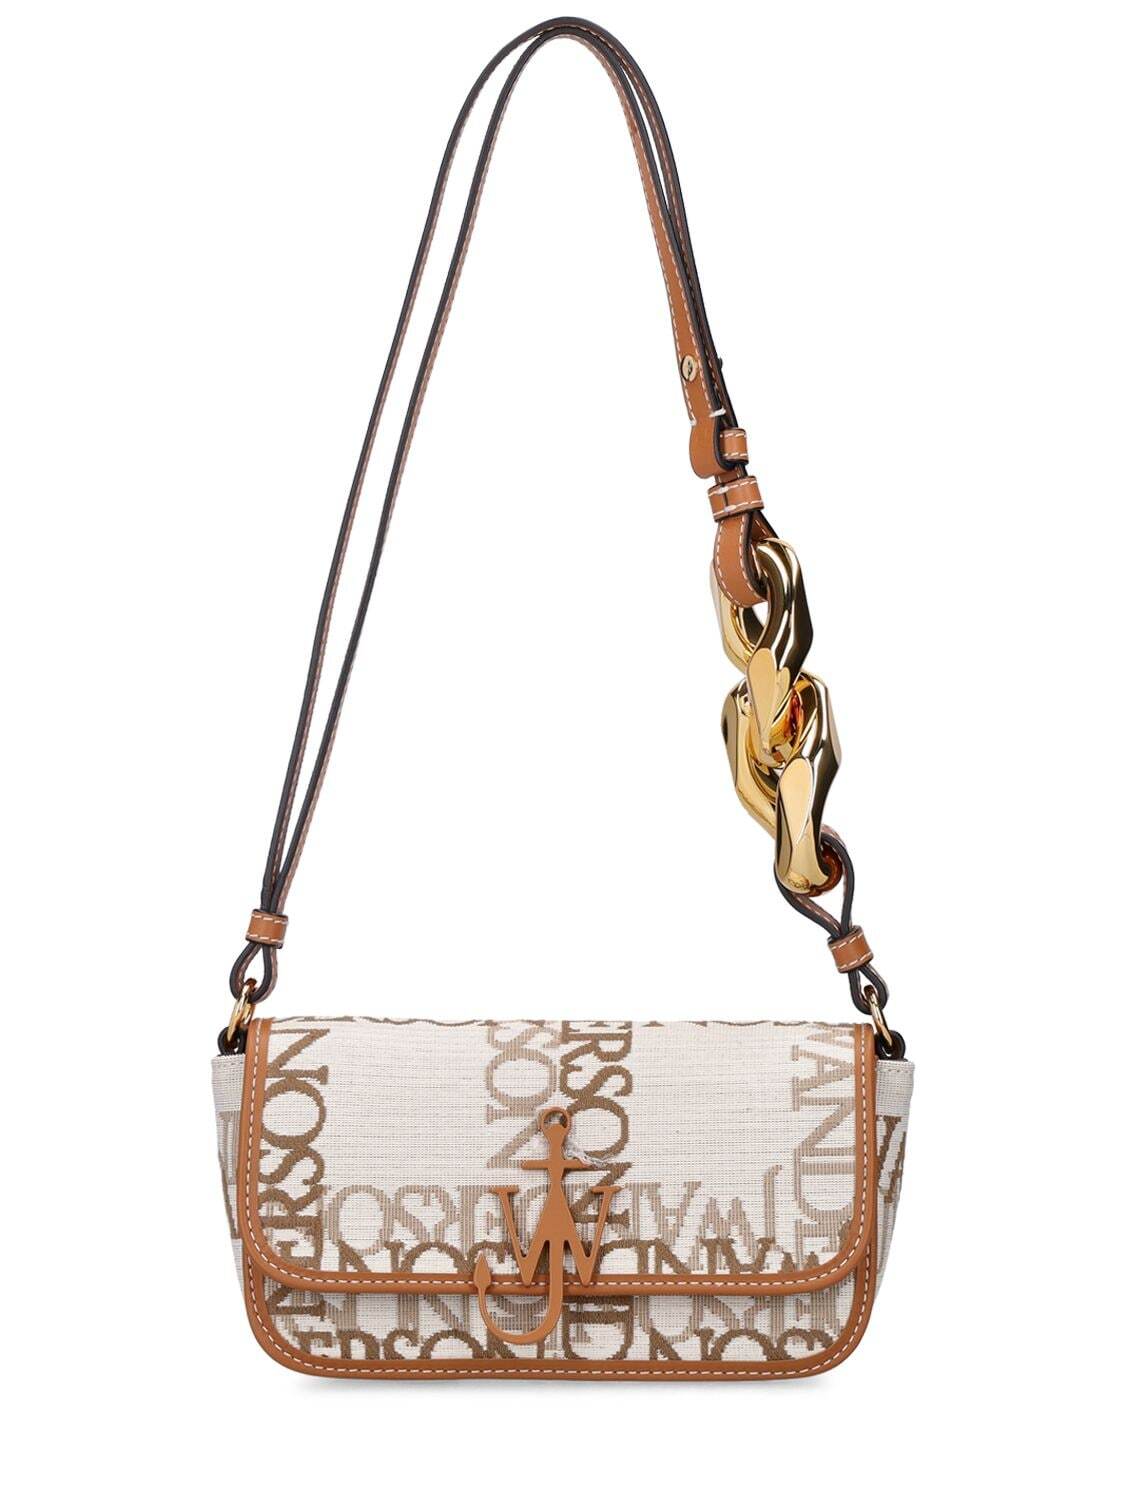 JW ANDERSON Chain Baguette Anchor Leather Bag in natural